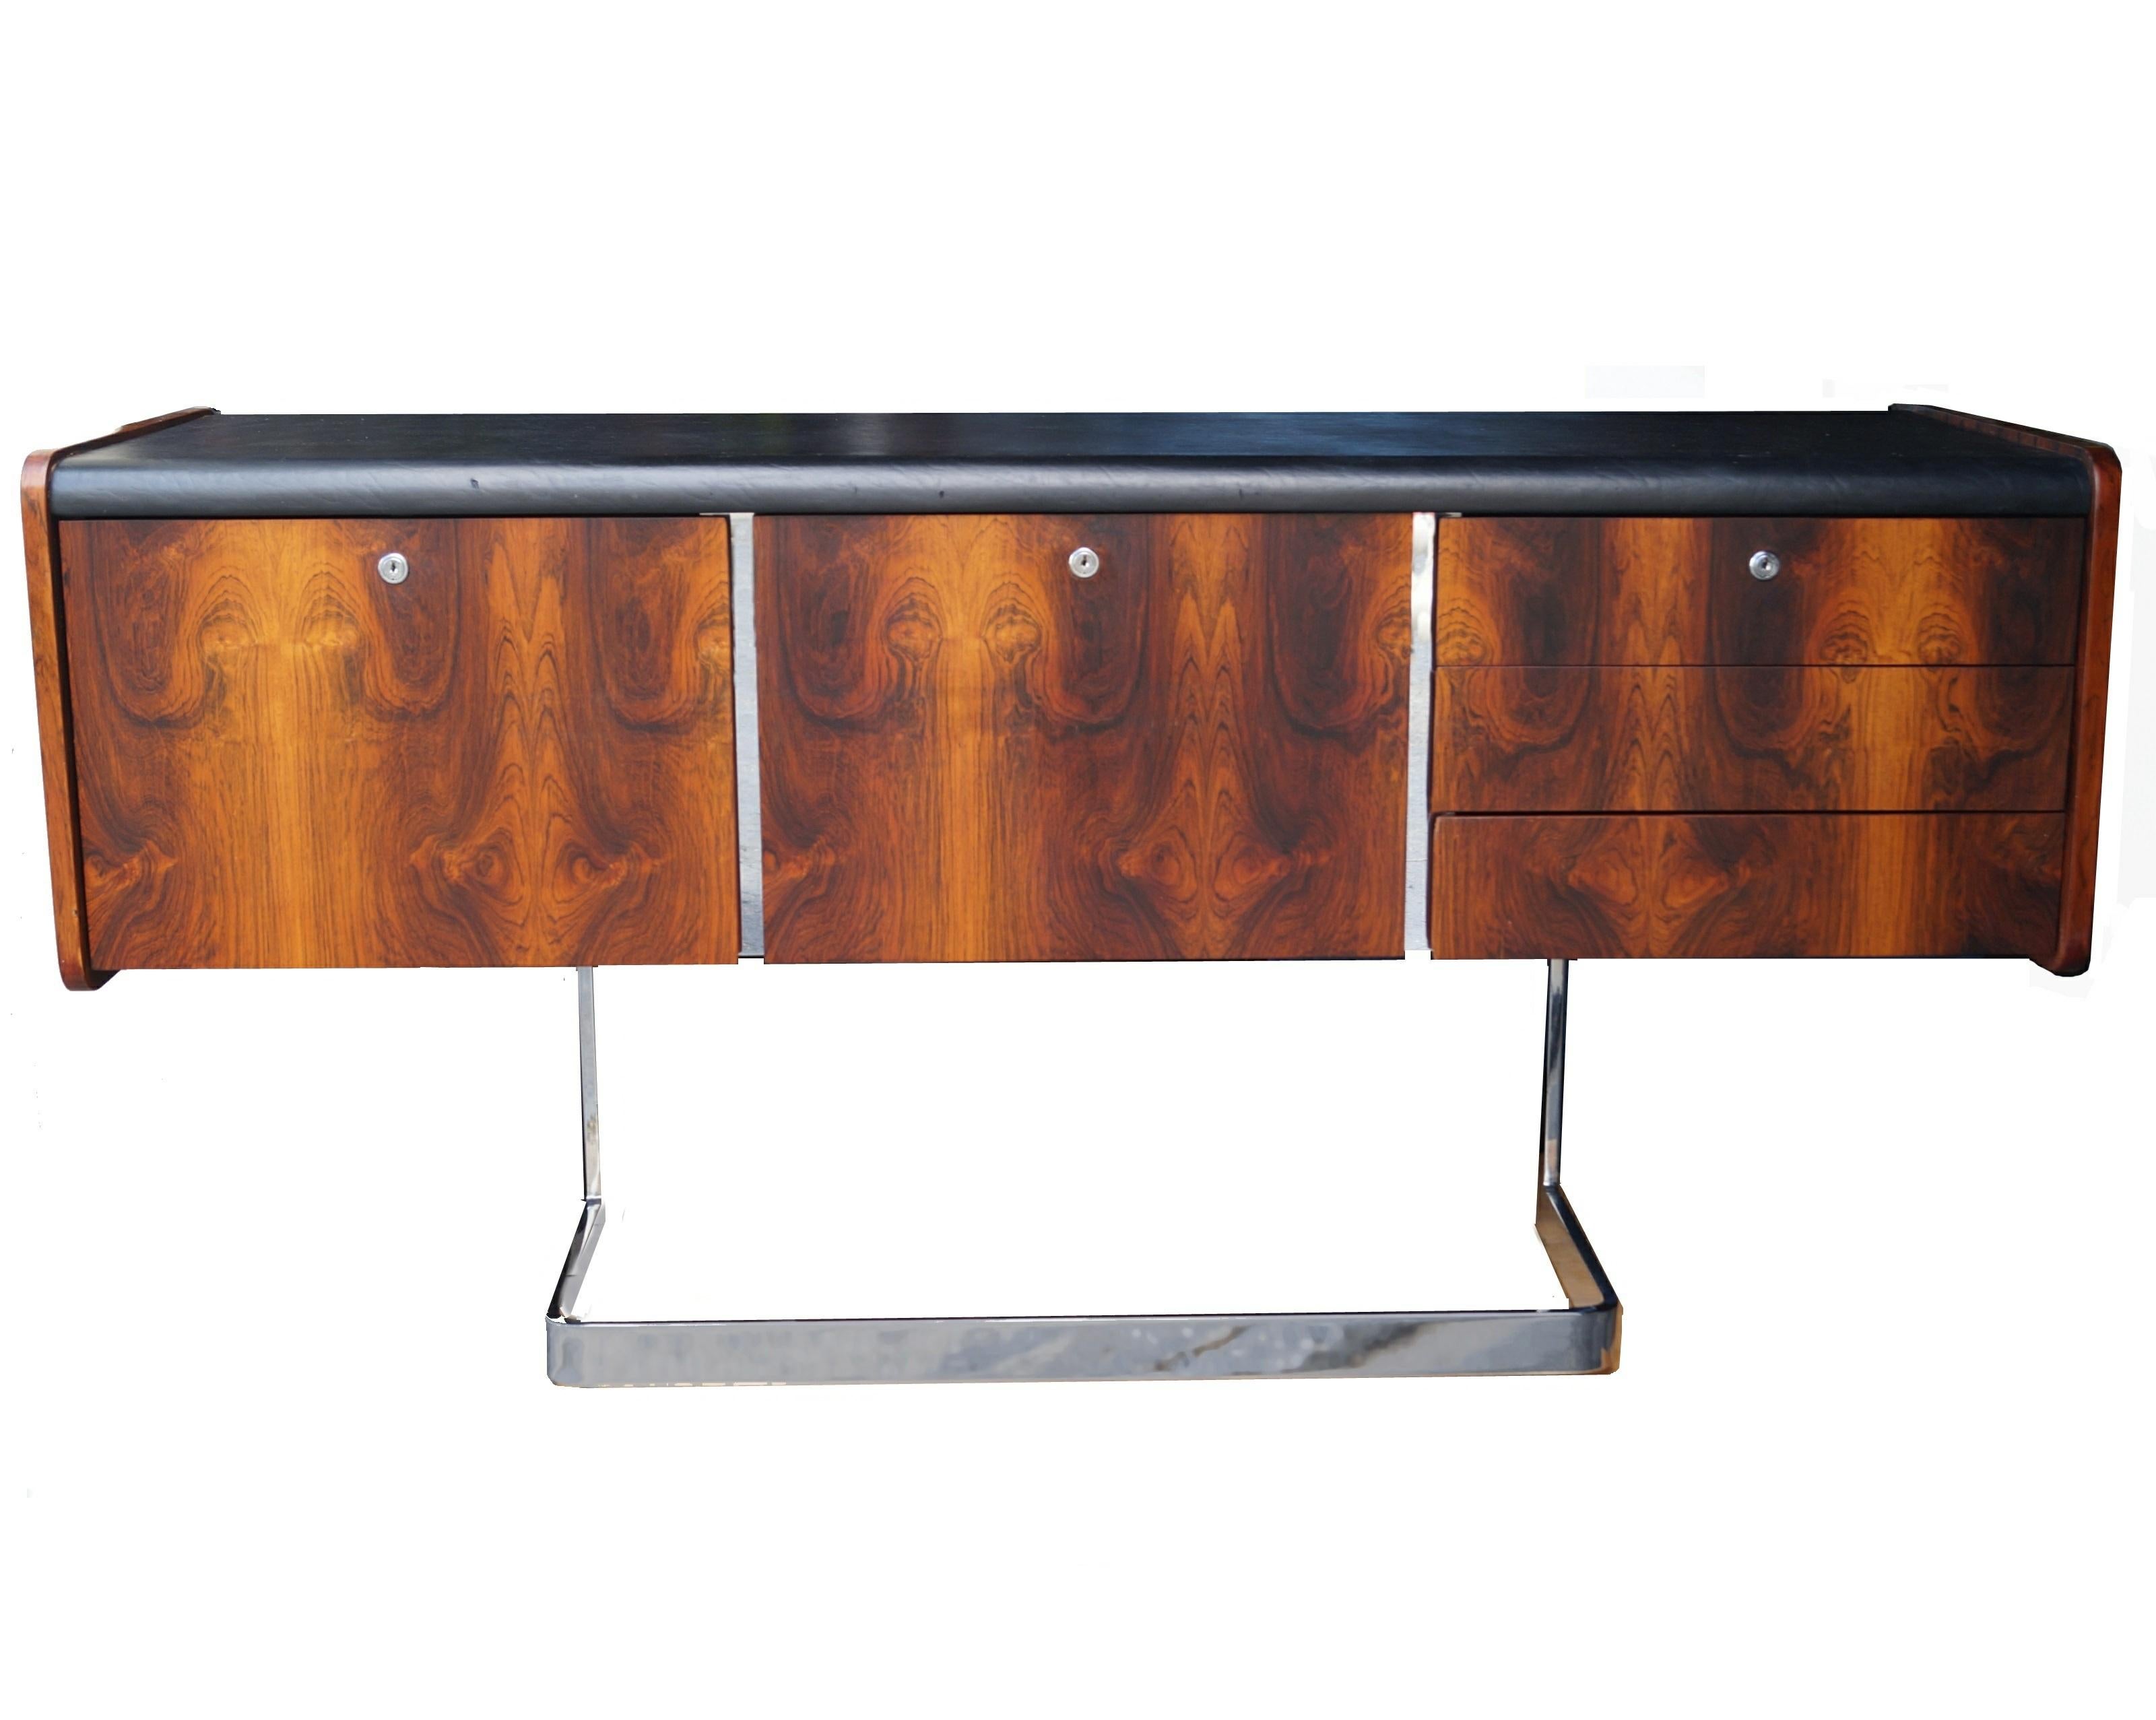 Mid-Century Modern rosewood and chrome credenza by Ste. Marie & Laurent.